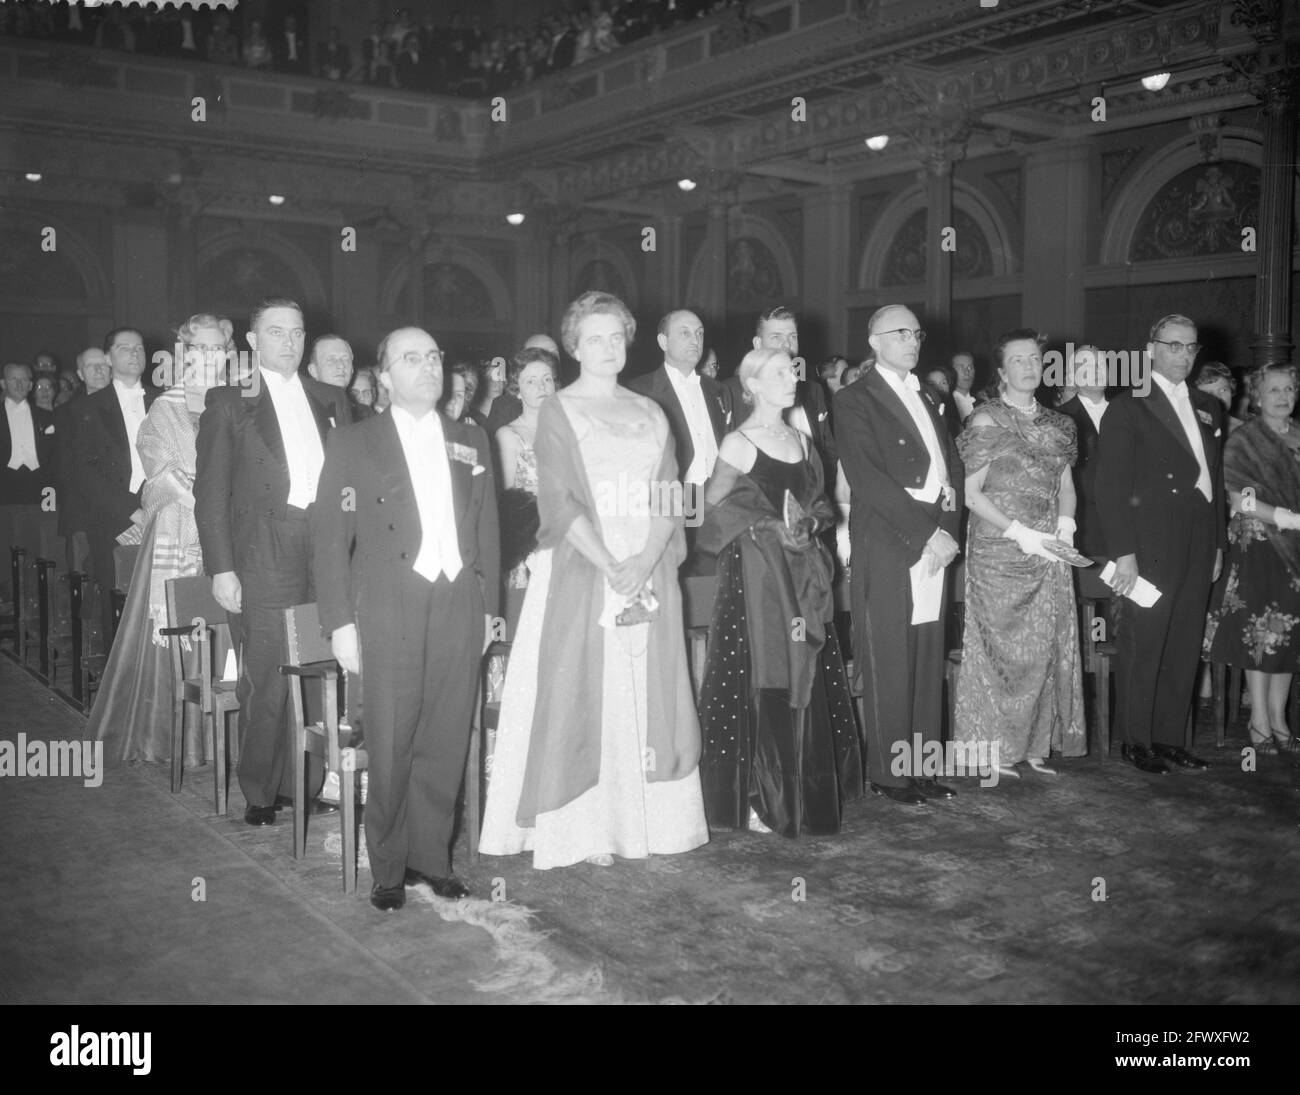 Opening of the 25th Book Week in the Concertgebouw, from left to right Minister Mr. J. M. L. Th. Cals , Mrs. Cals Mr. Chr. Leeflang , Chairman of the Stock Photo